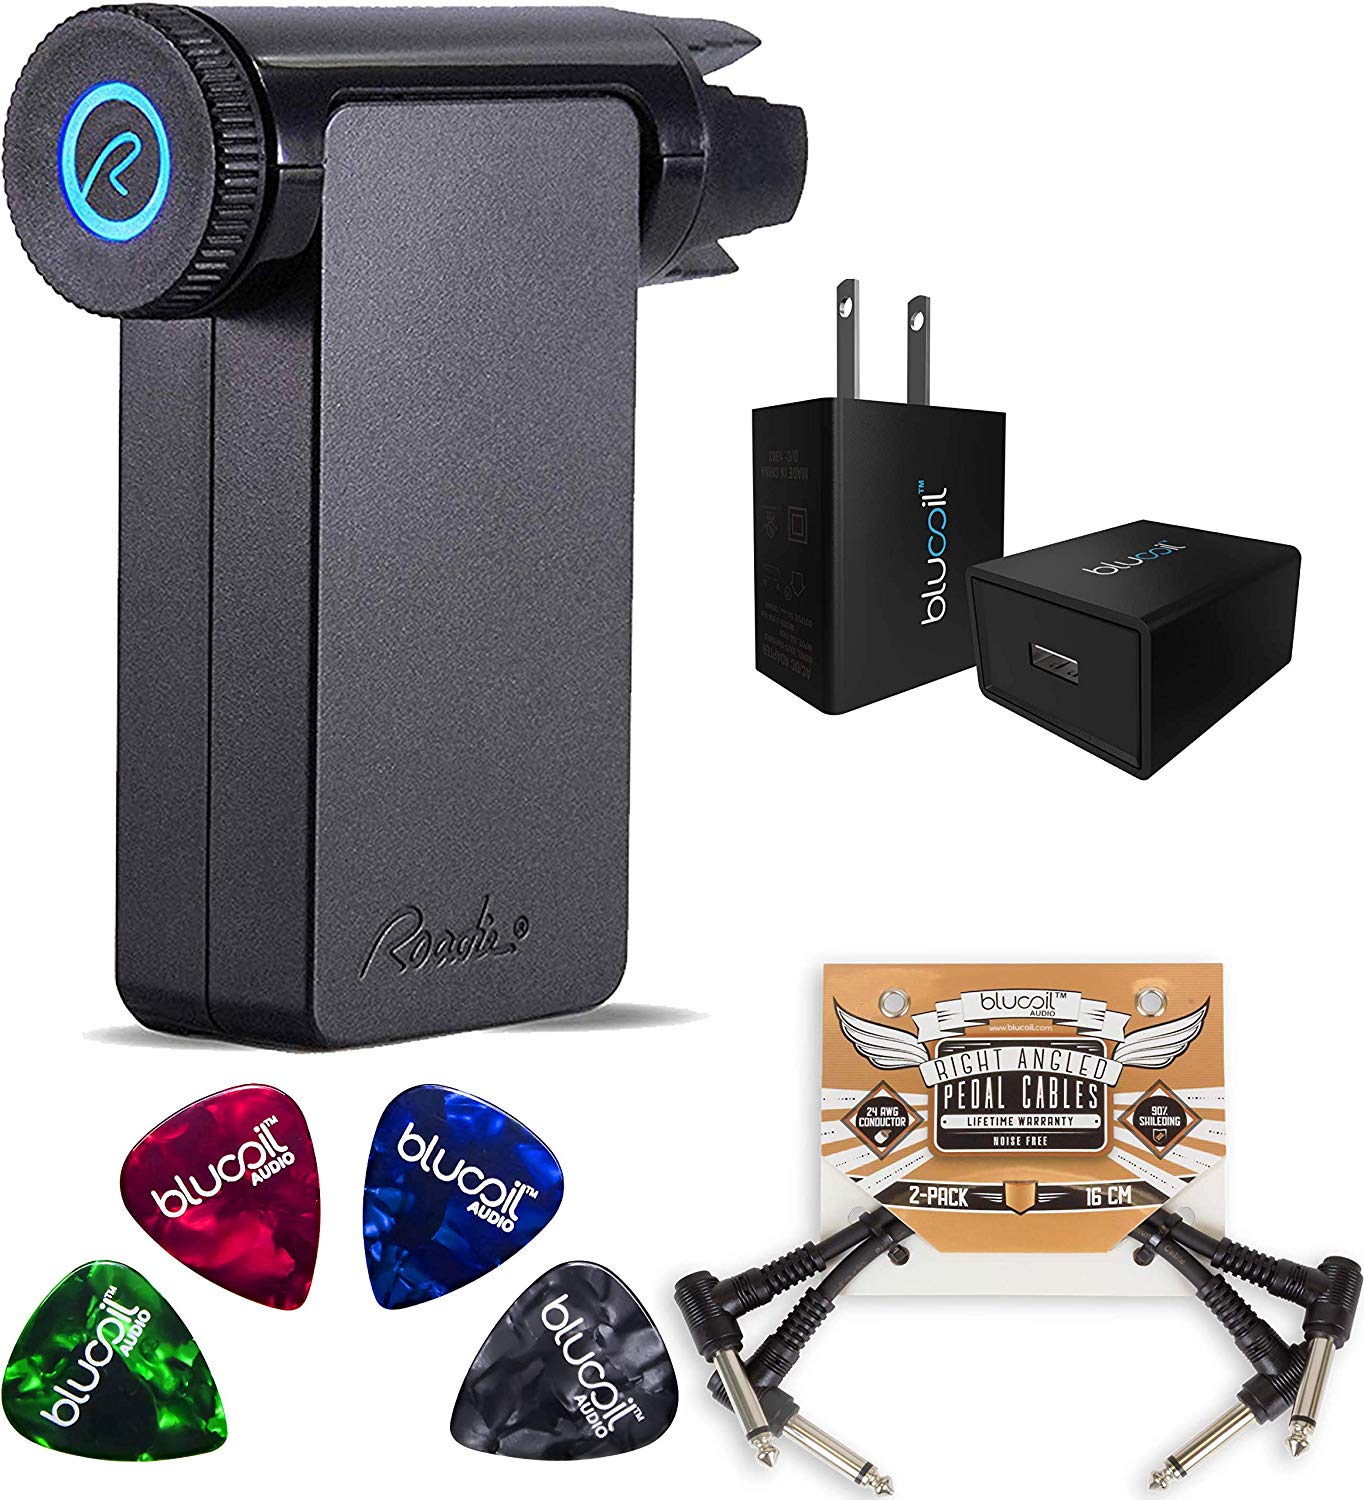 Roadie 2 RD200 Standalone Automatic Guitar Tuner Bundled With Blucoil USB Wall Adapter, 2-Pack of Pedal Patch Cables, and 4-Pack of Celluloid Guitar P 2